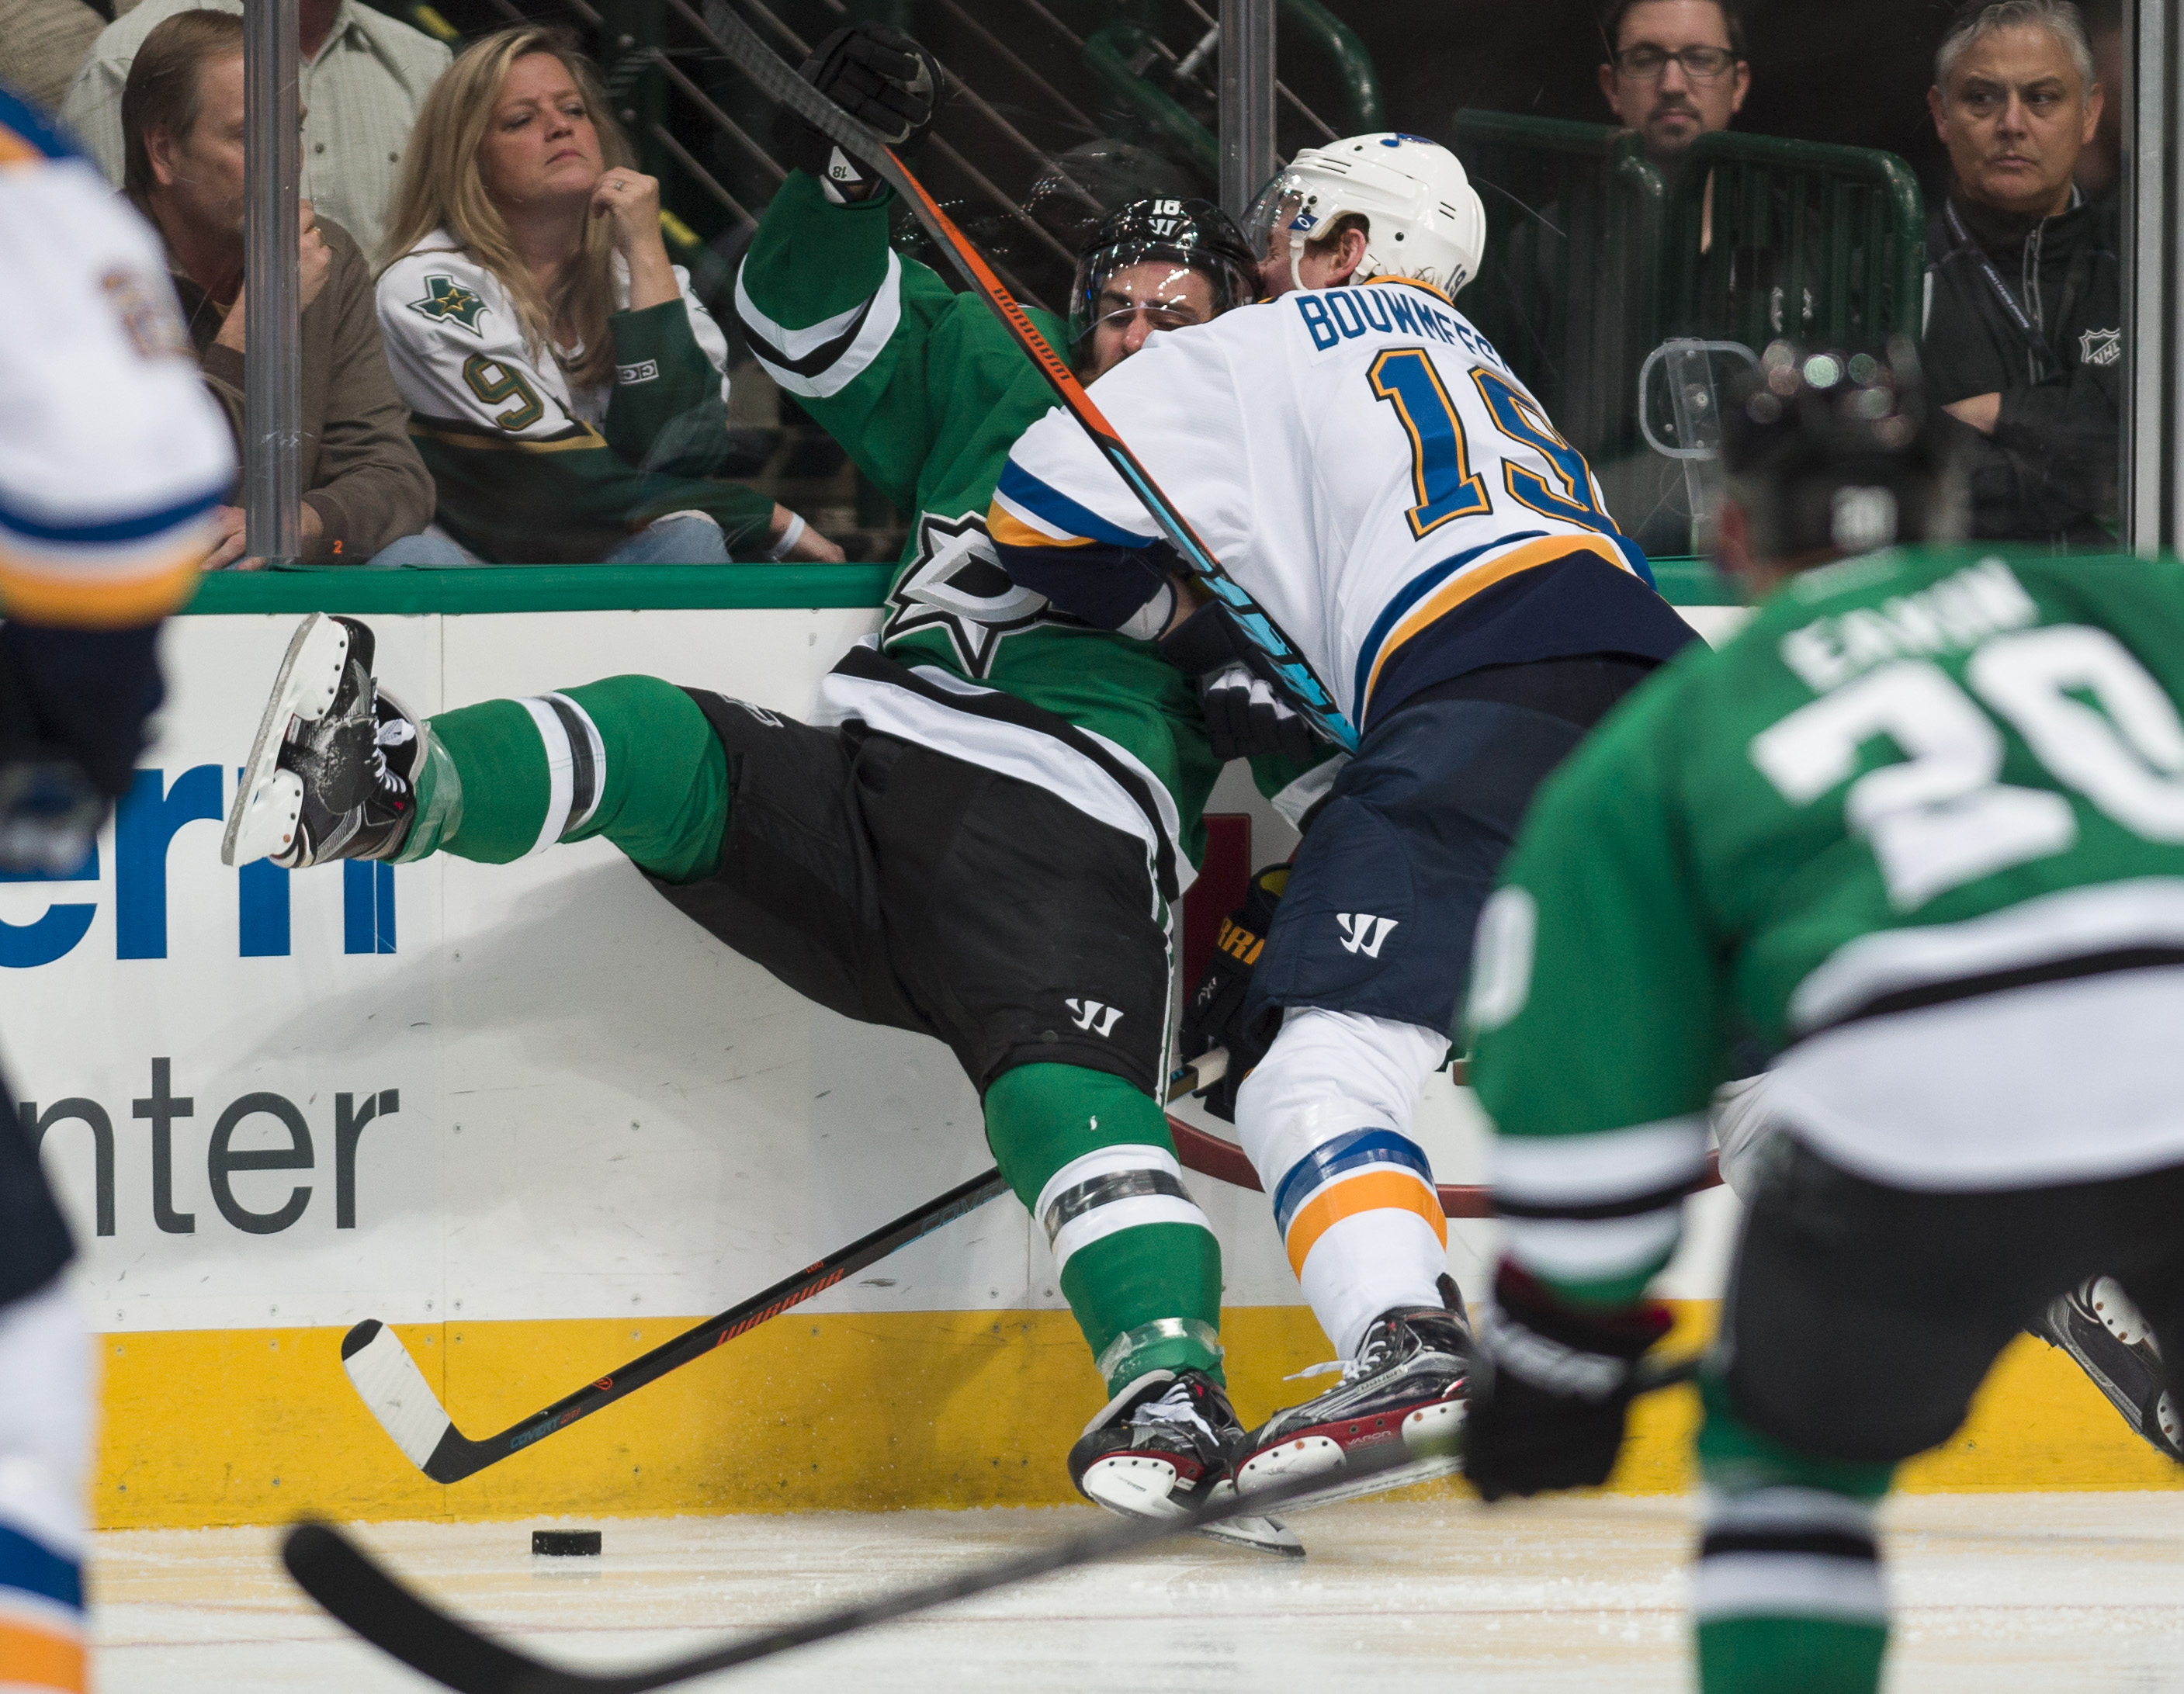 It's ok. Brett Ritchie would get revenge on Bouwmeester for Eaves.